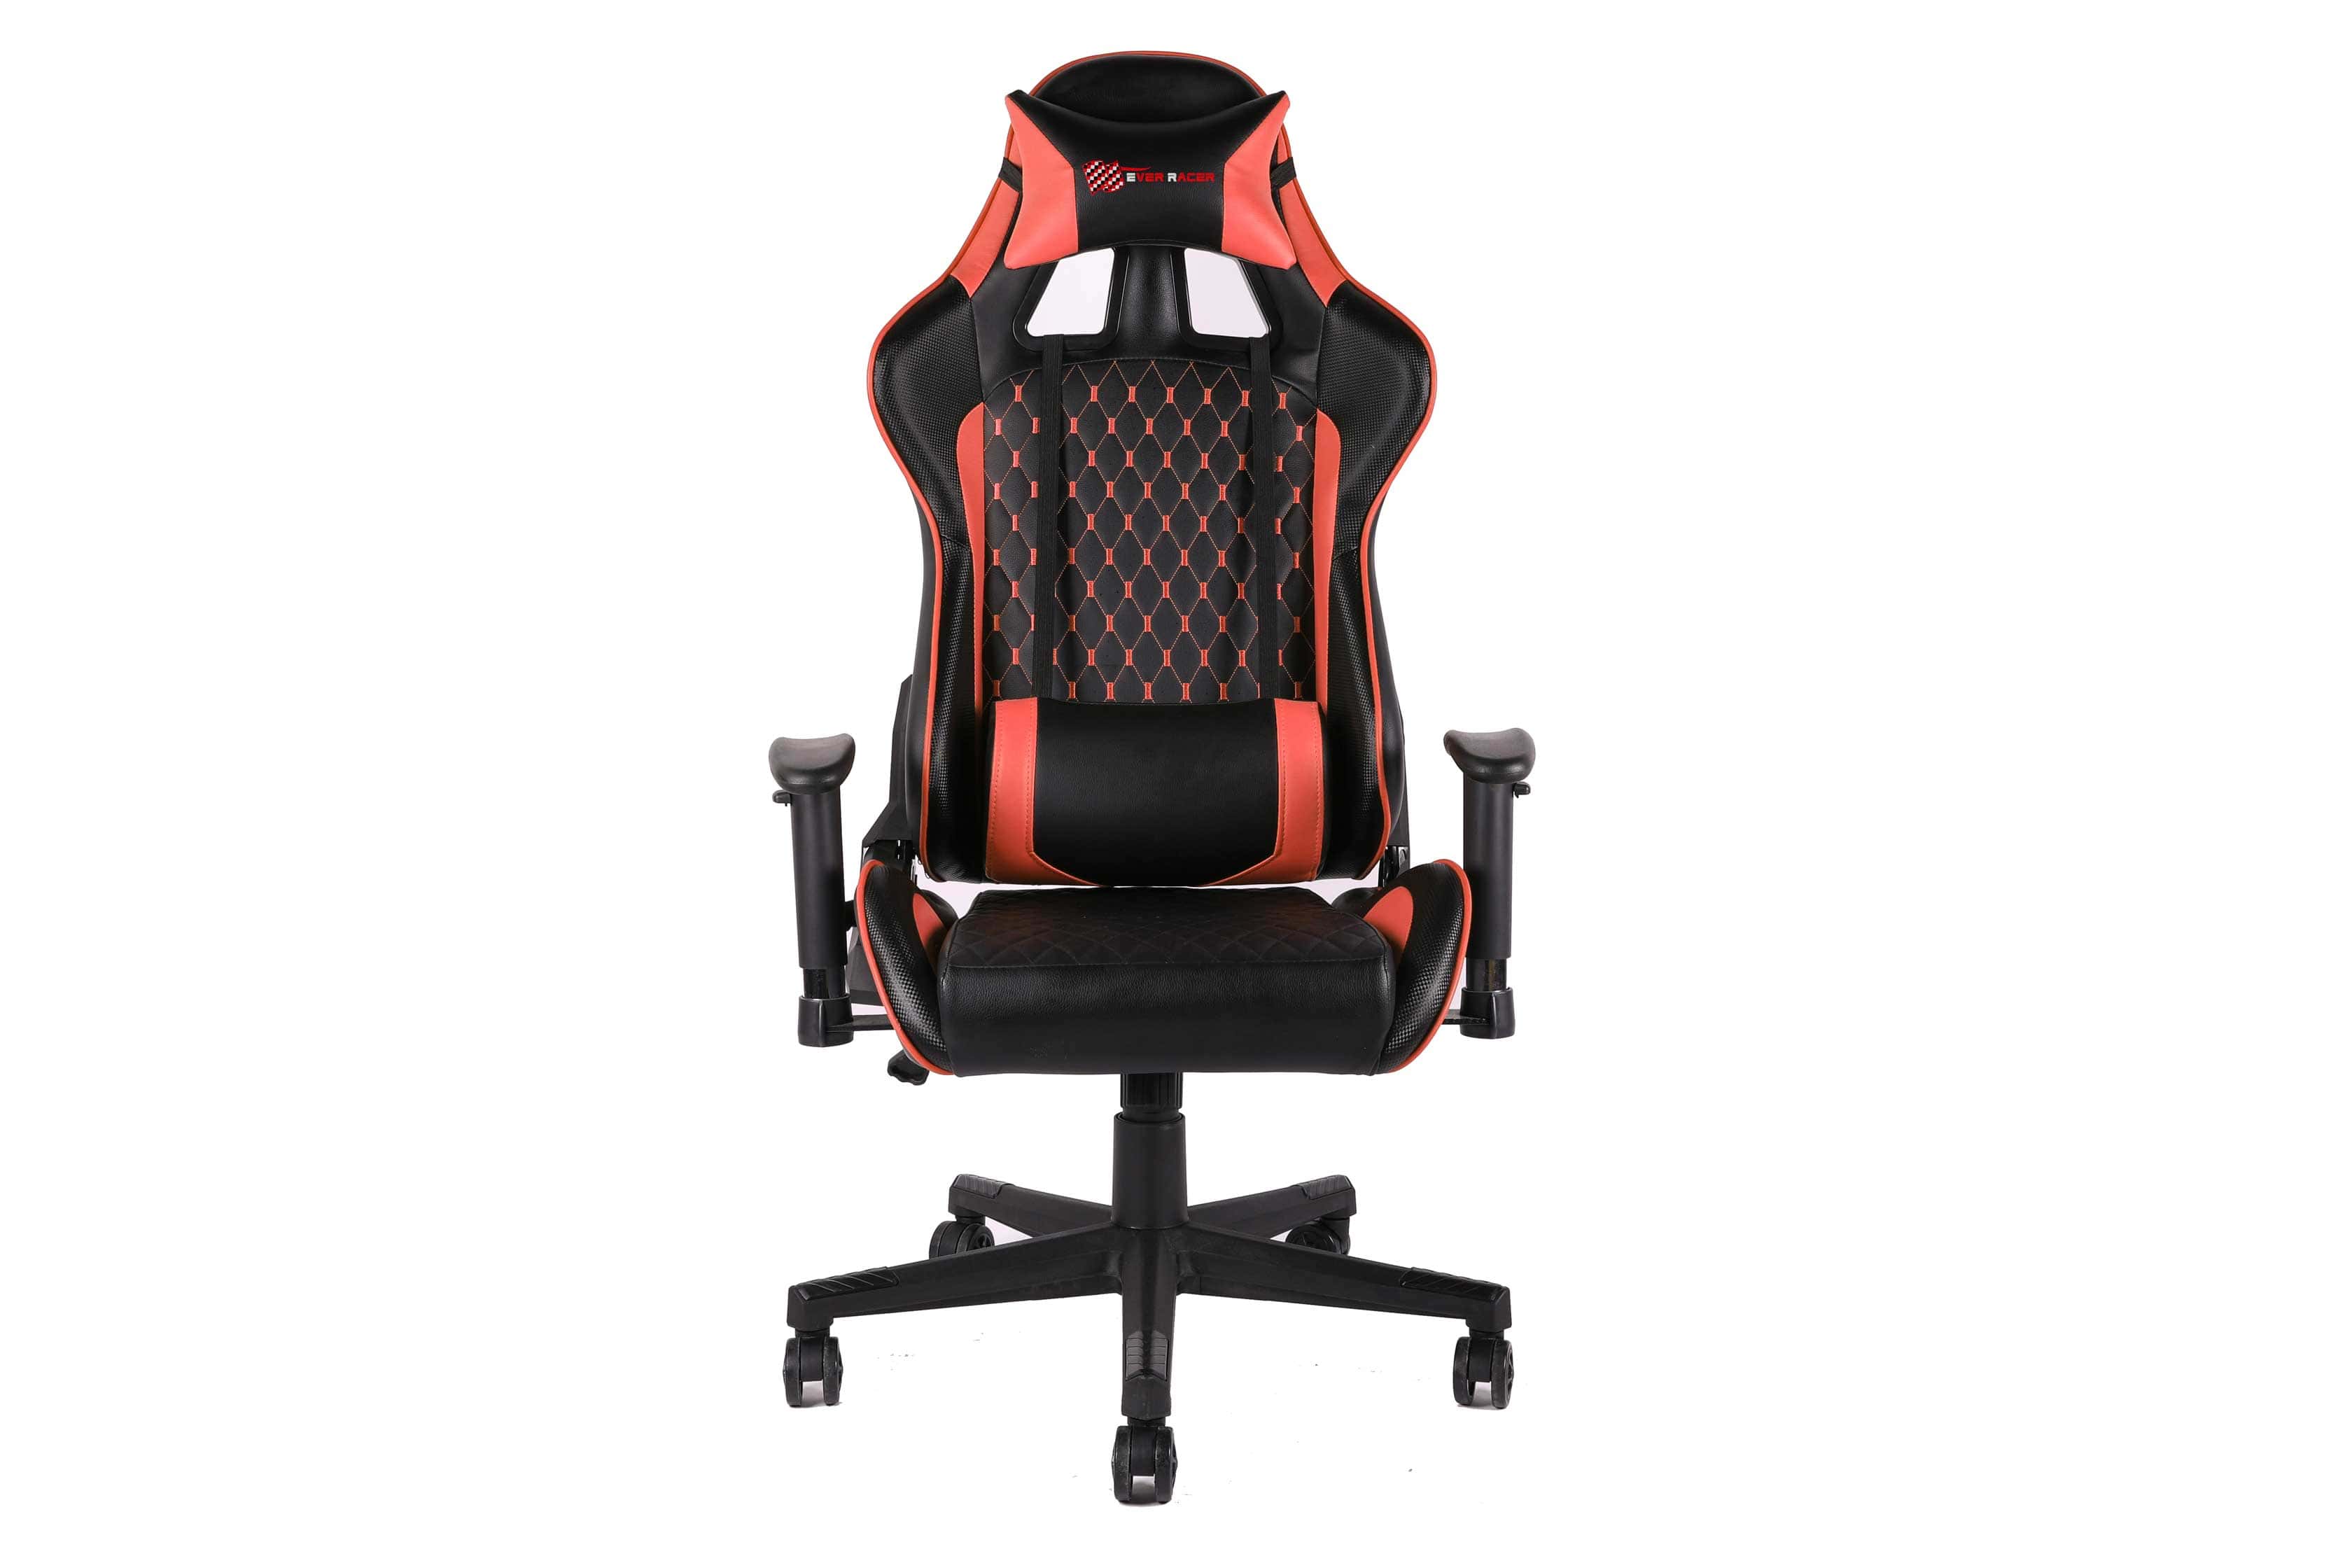 Everracer Gaming Chairs